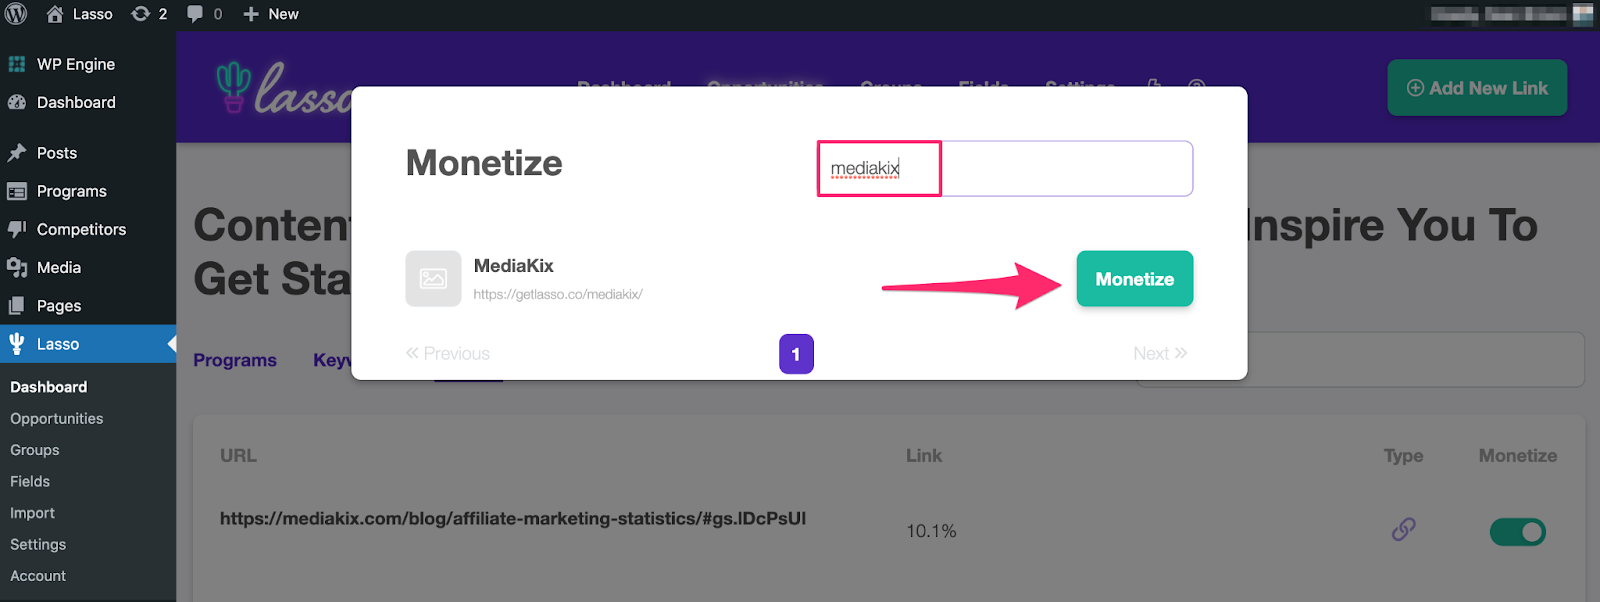 finding the affiliate you want to monetize in the search field then clicking the green monetize button